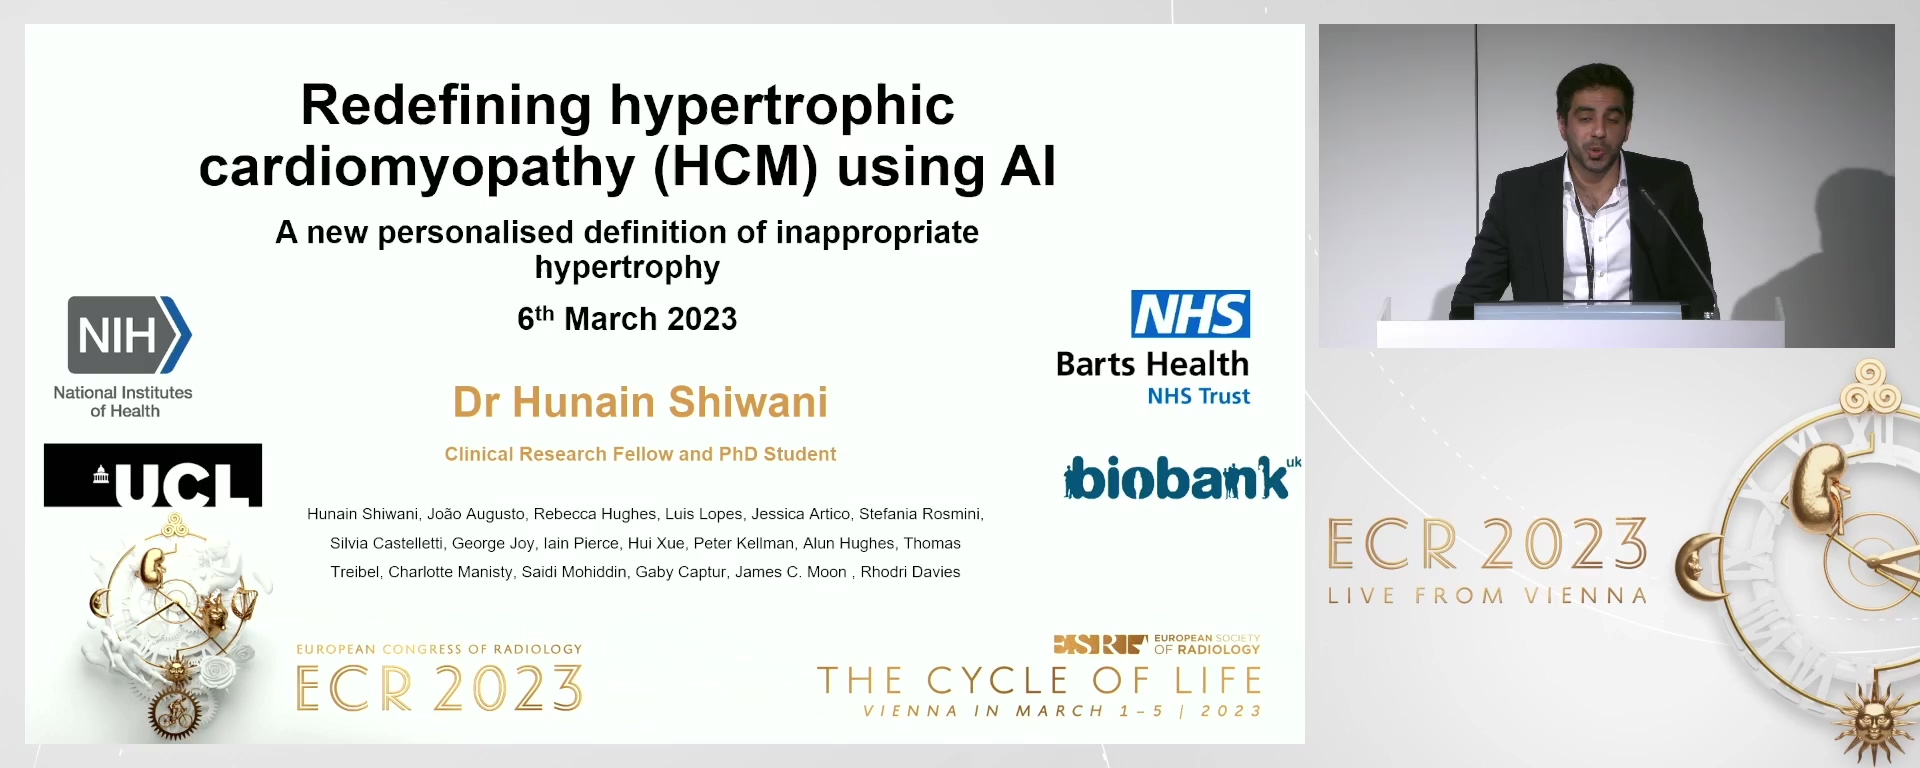 Redefining hypertrophic cardiomyopathy using AI: a new personalised definition of inappropriate hypertrophy - Hunain  Shiwani, London / UK